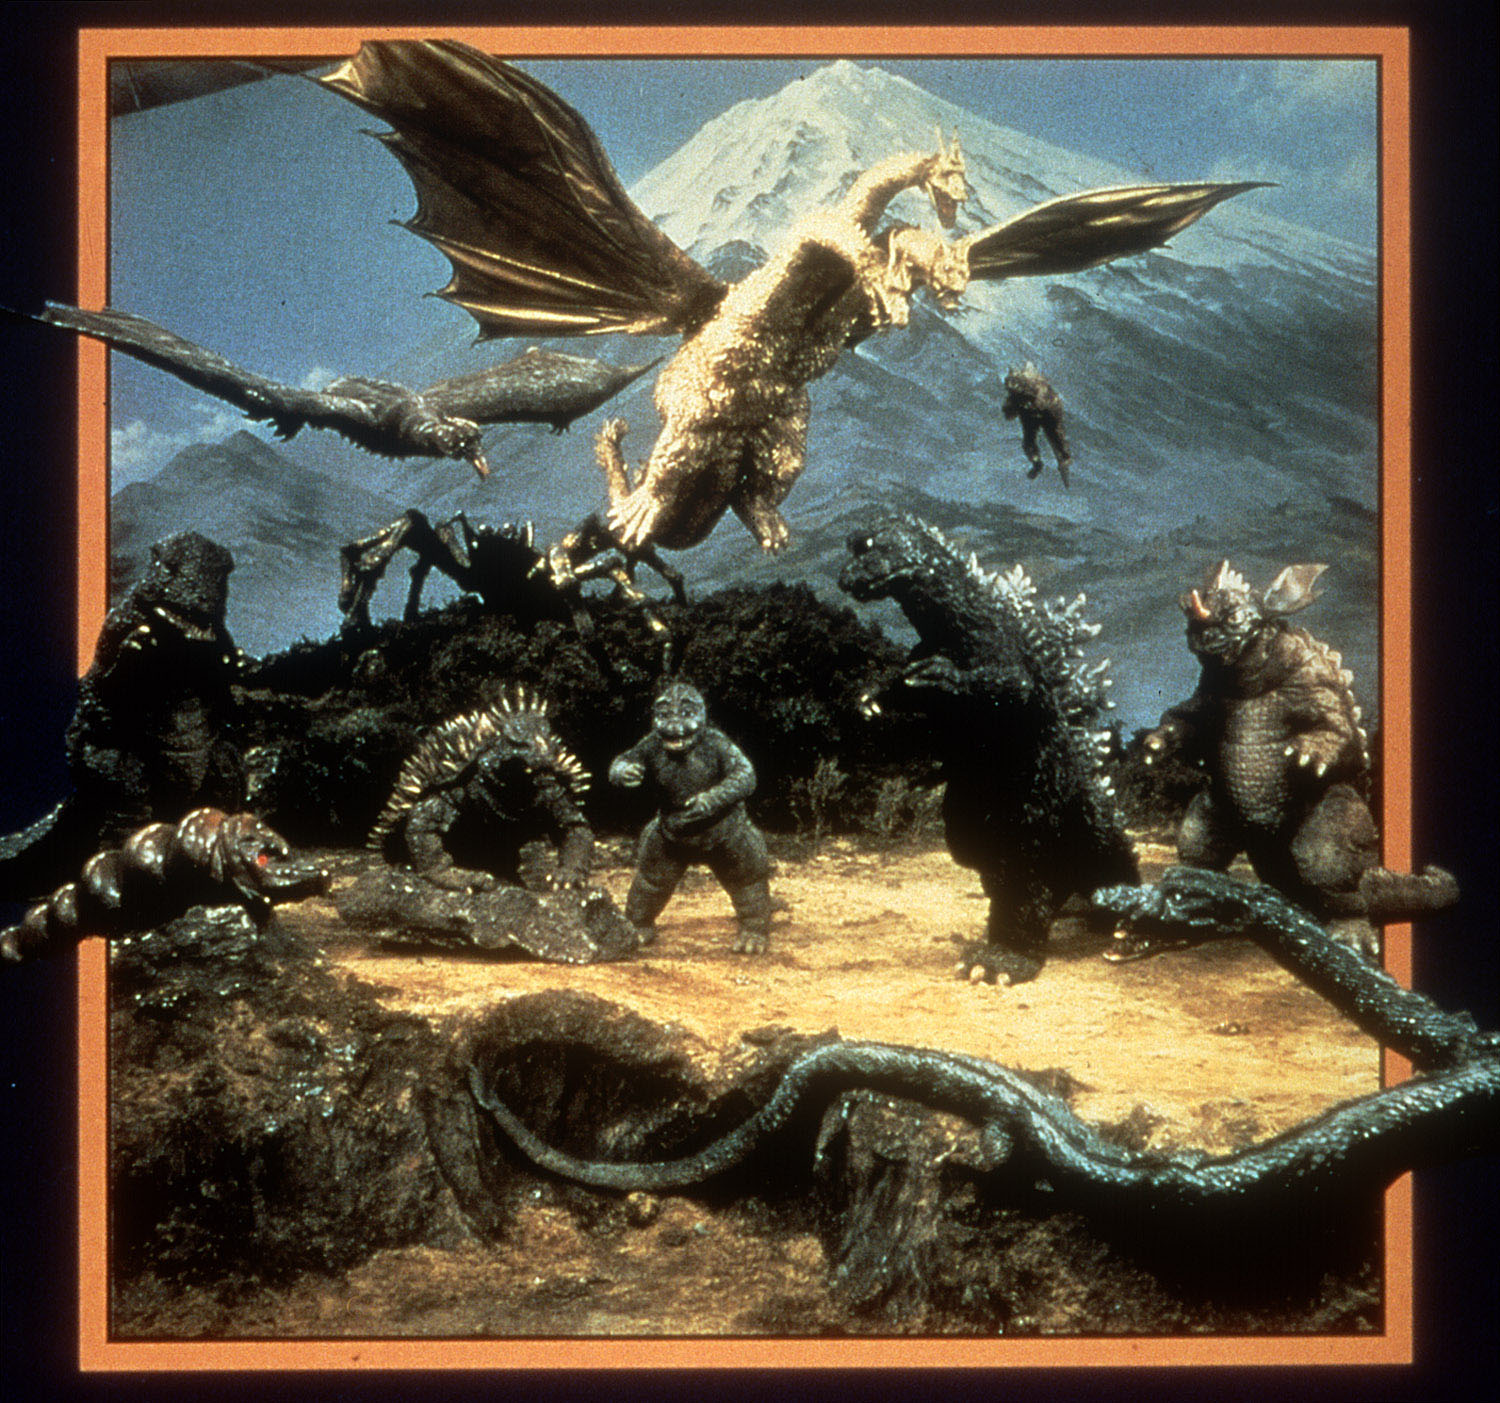 promo image for the 1968 movie "Destroy All Monsters." It depicts the 11 monsters featured in the movie, all in front of Mt. Fuji, where the final battle takes place. Featured, clockwise from top left: Rodan, Ghidorah, Varan (these three are flying), Godzilla, Baragon, Manda, Minilla, Anguirus, Mothra, Gorosaurus and Kumonga.